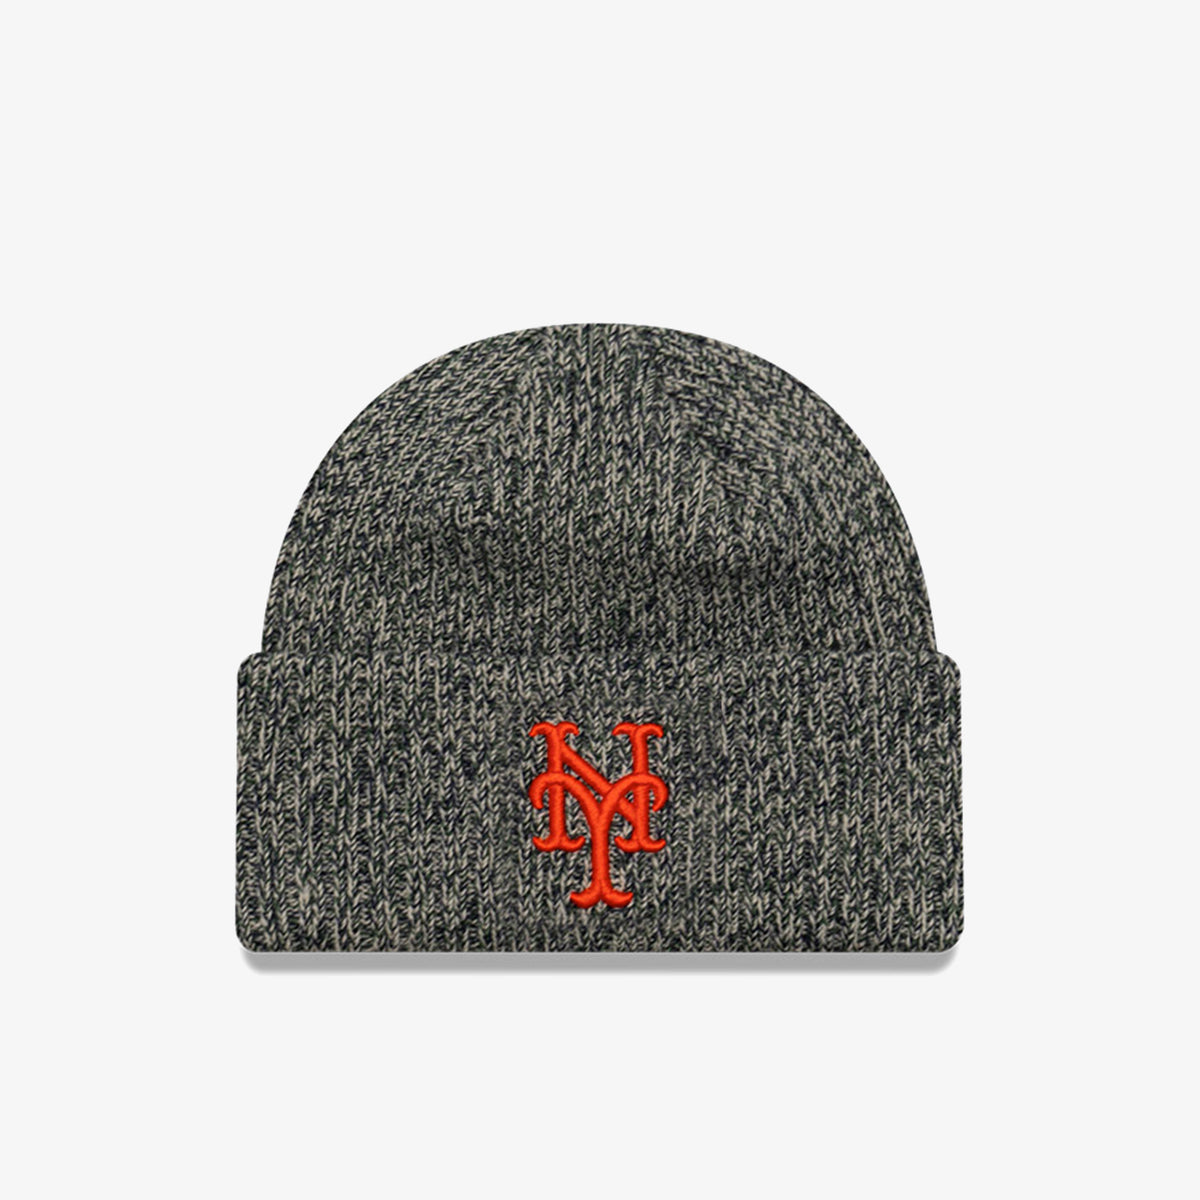 New York Speckle Knit Beanie - Olive Marle